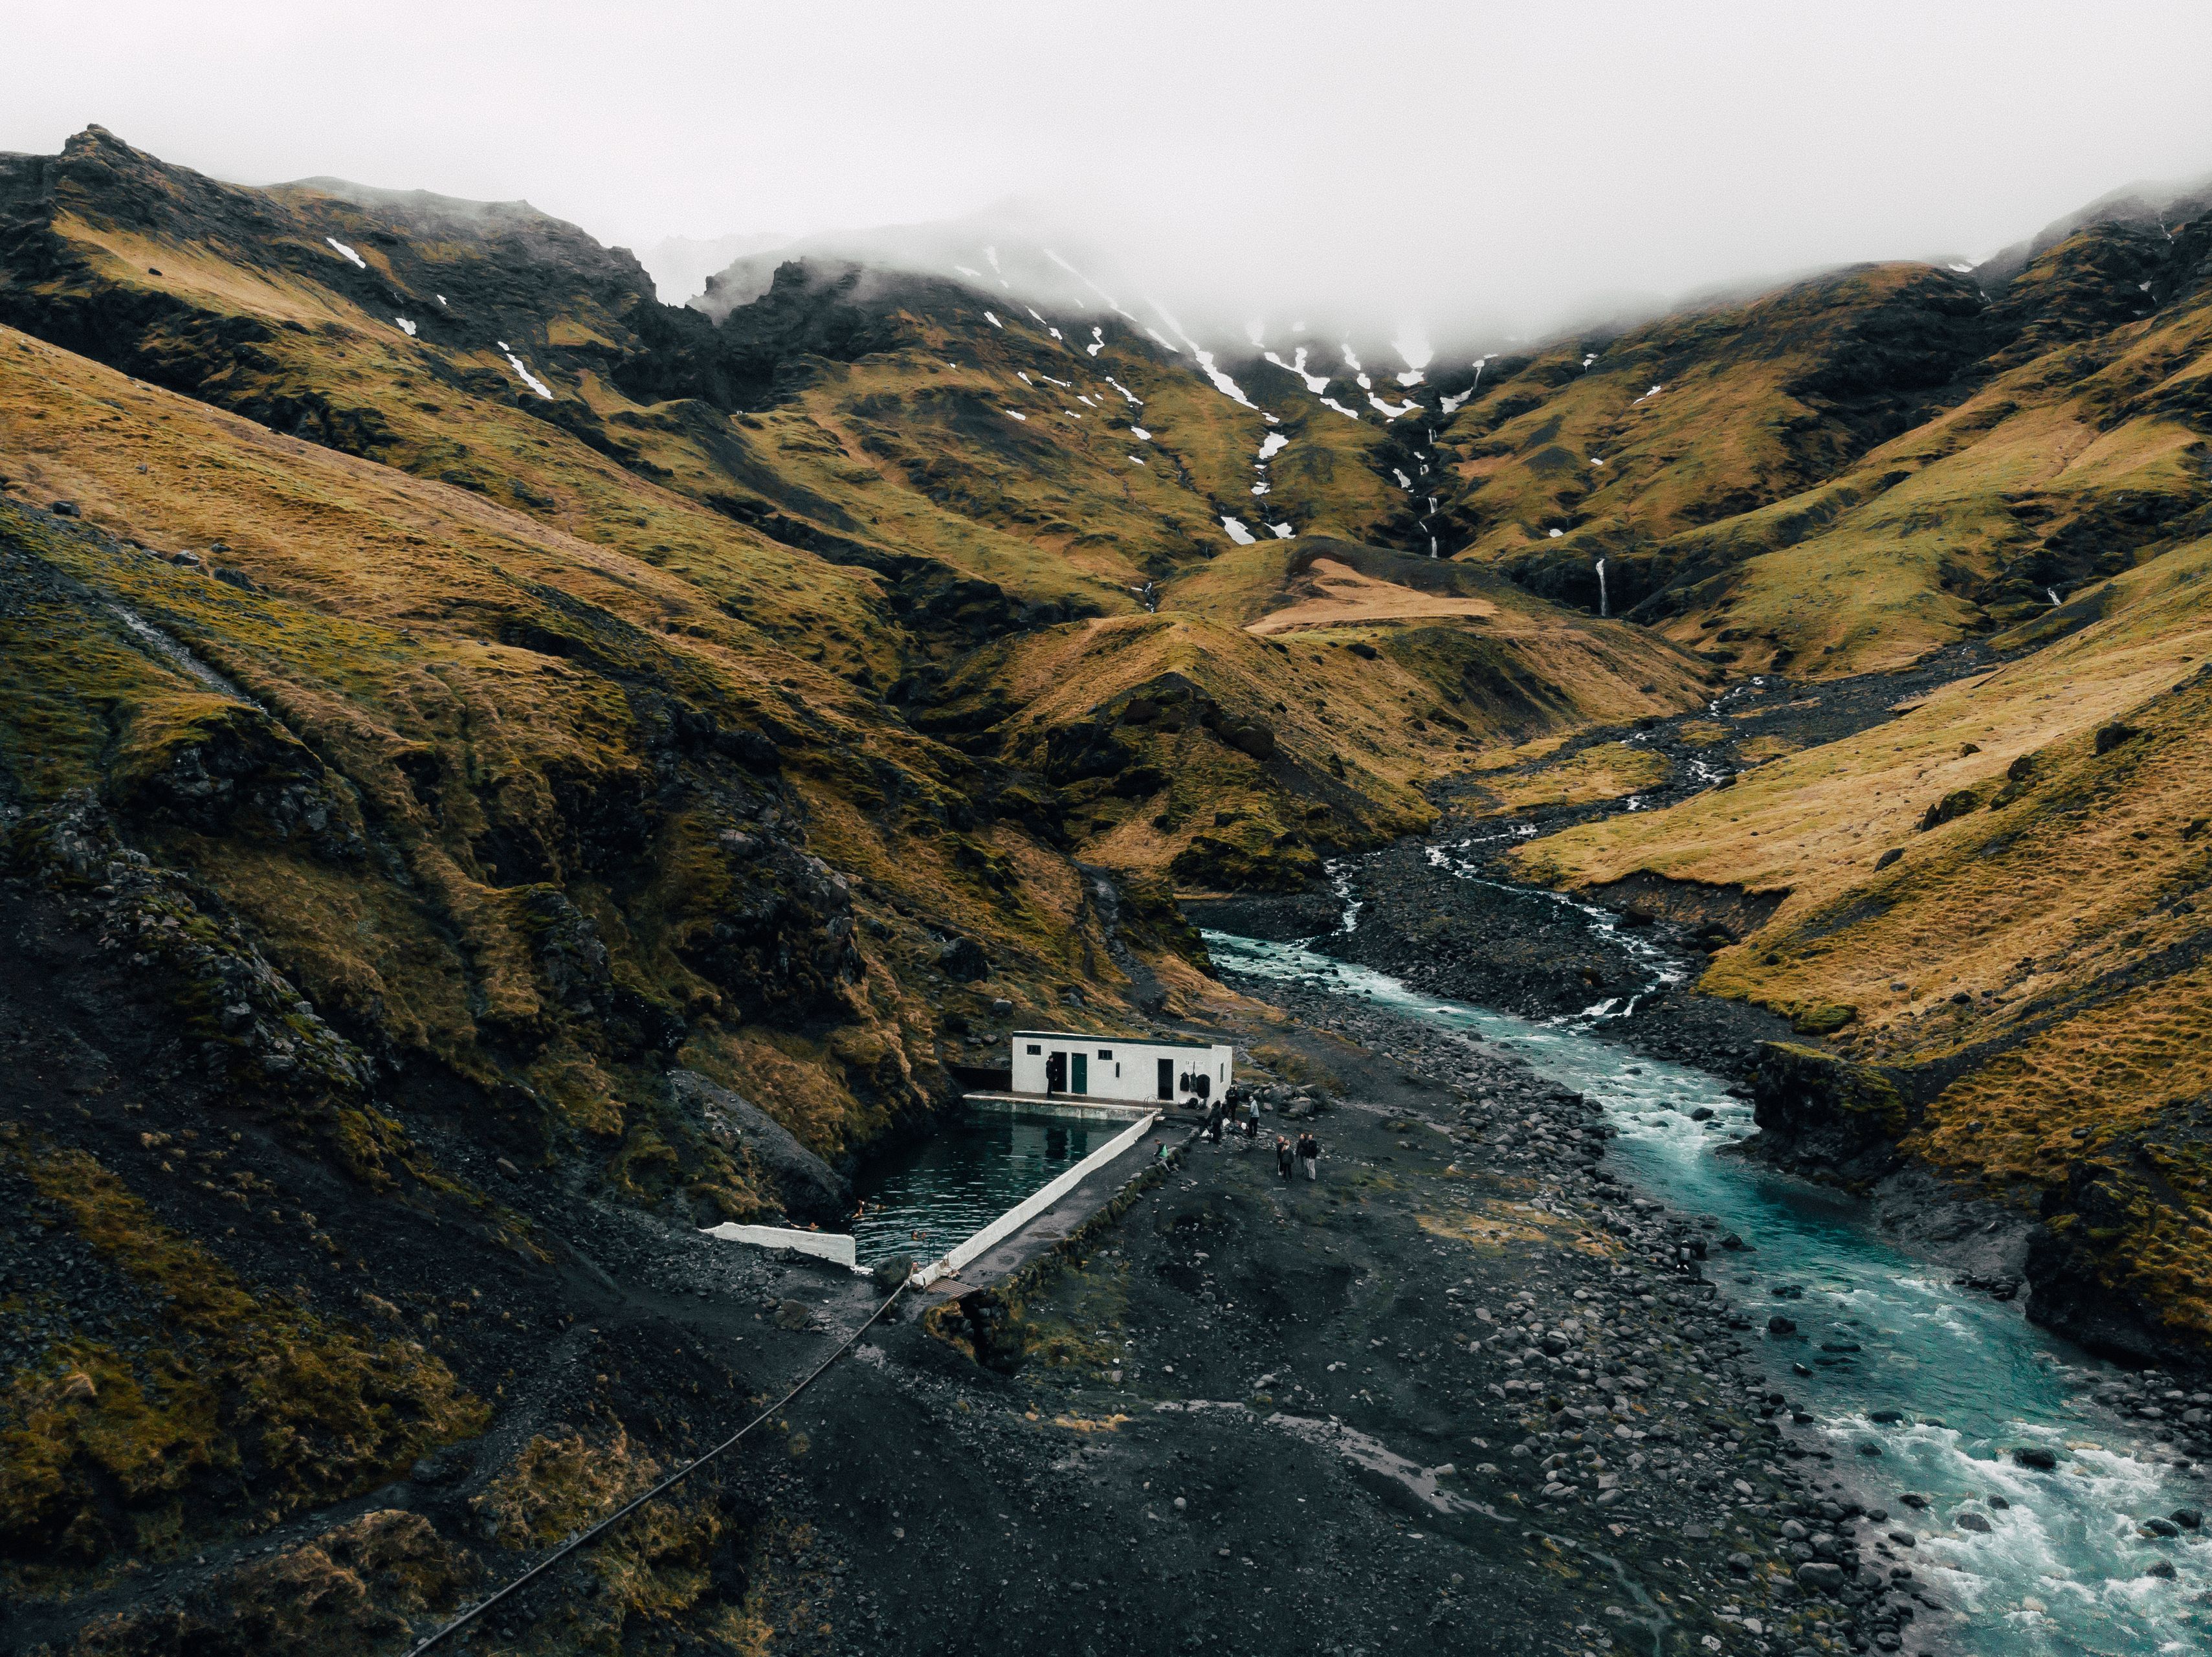 Fall in Iceland's mountains, natural hot spring pool